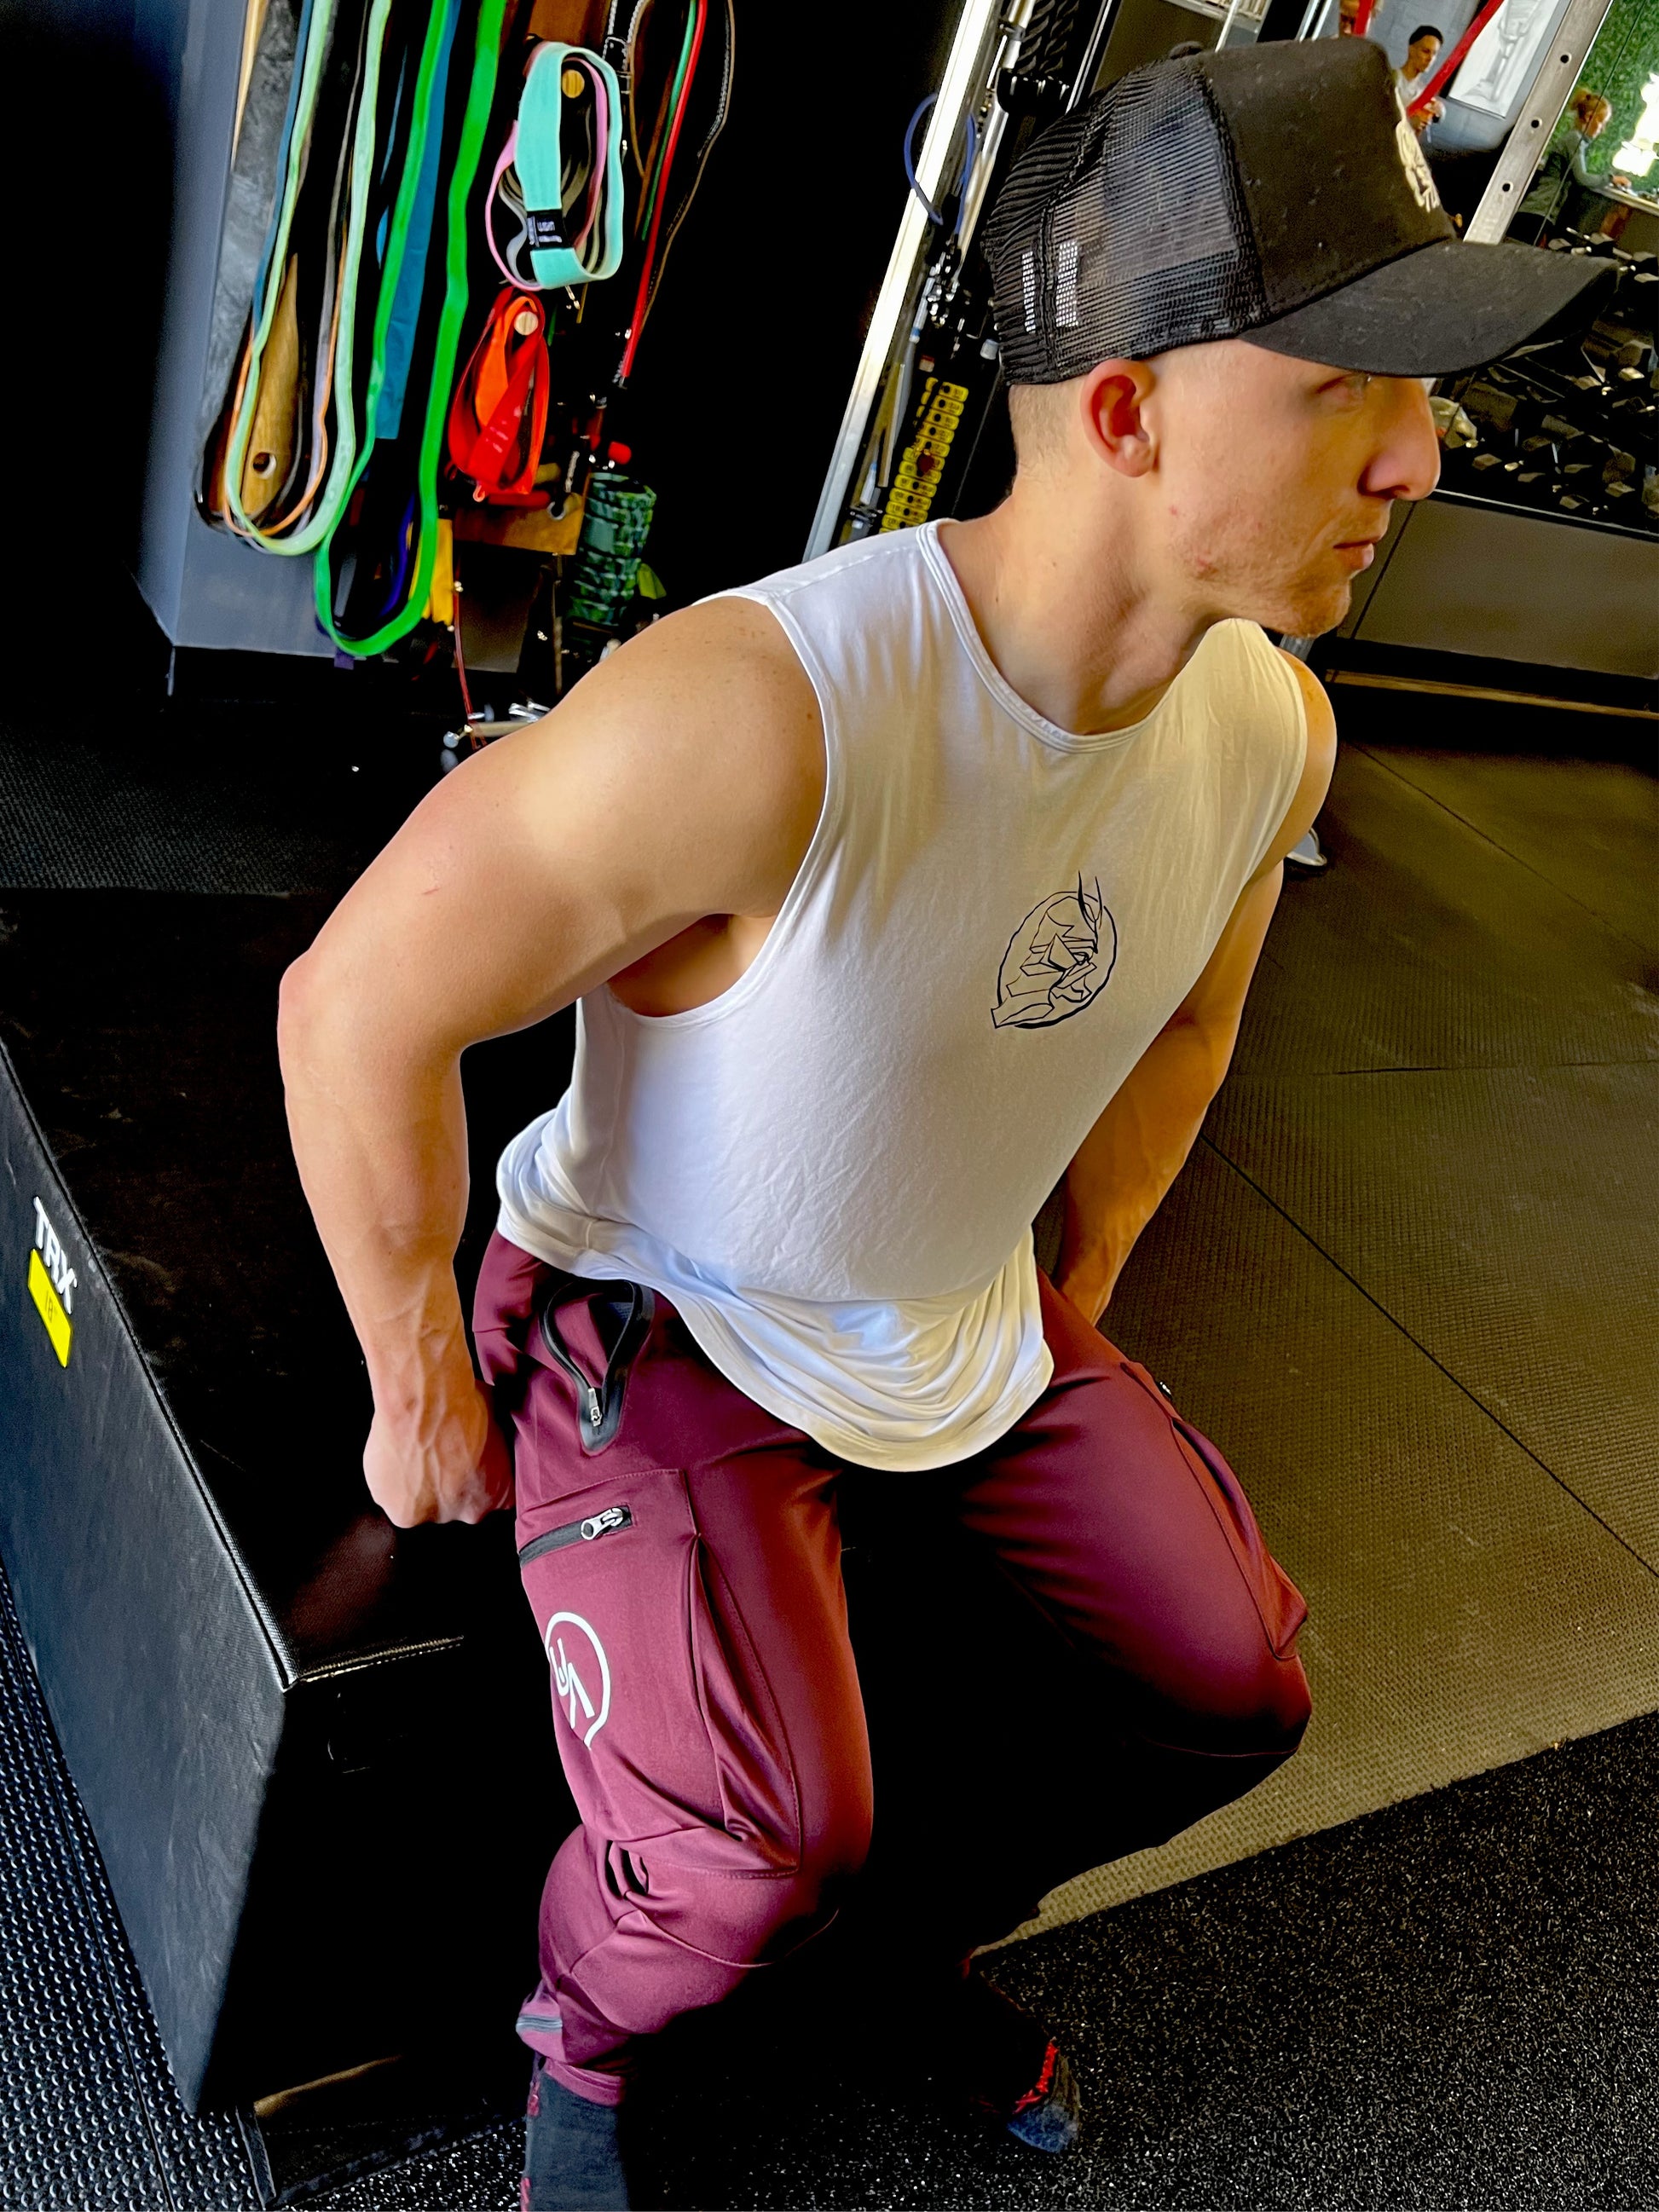 Man Sitting in gym in Maroon Warrior joggers.  Zipper side pockets and logo showing.